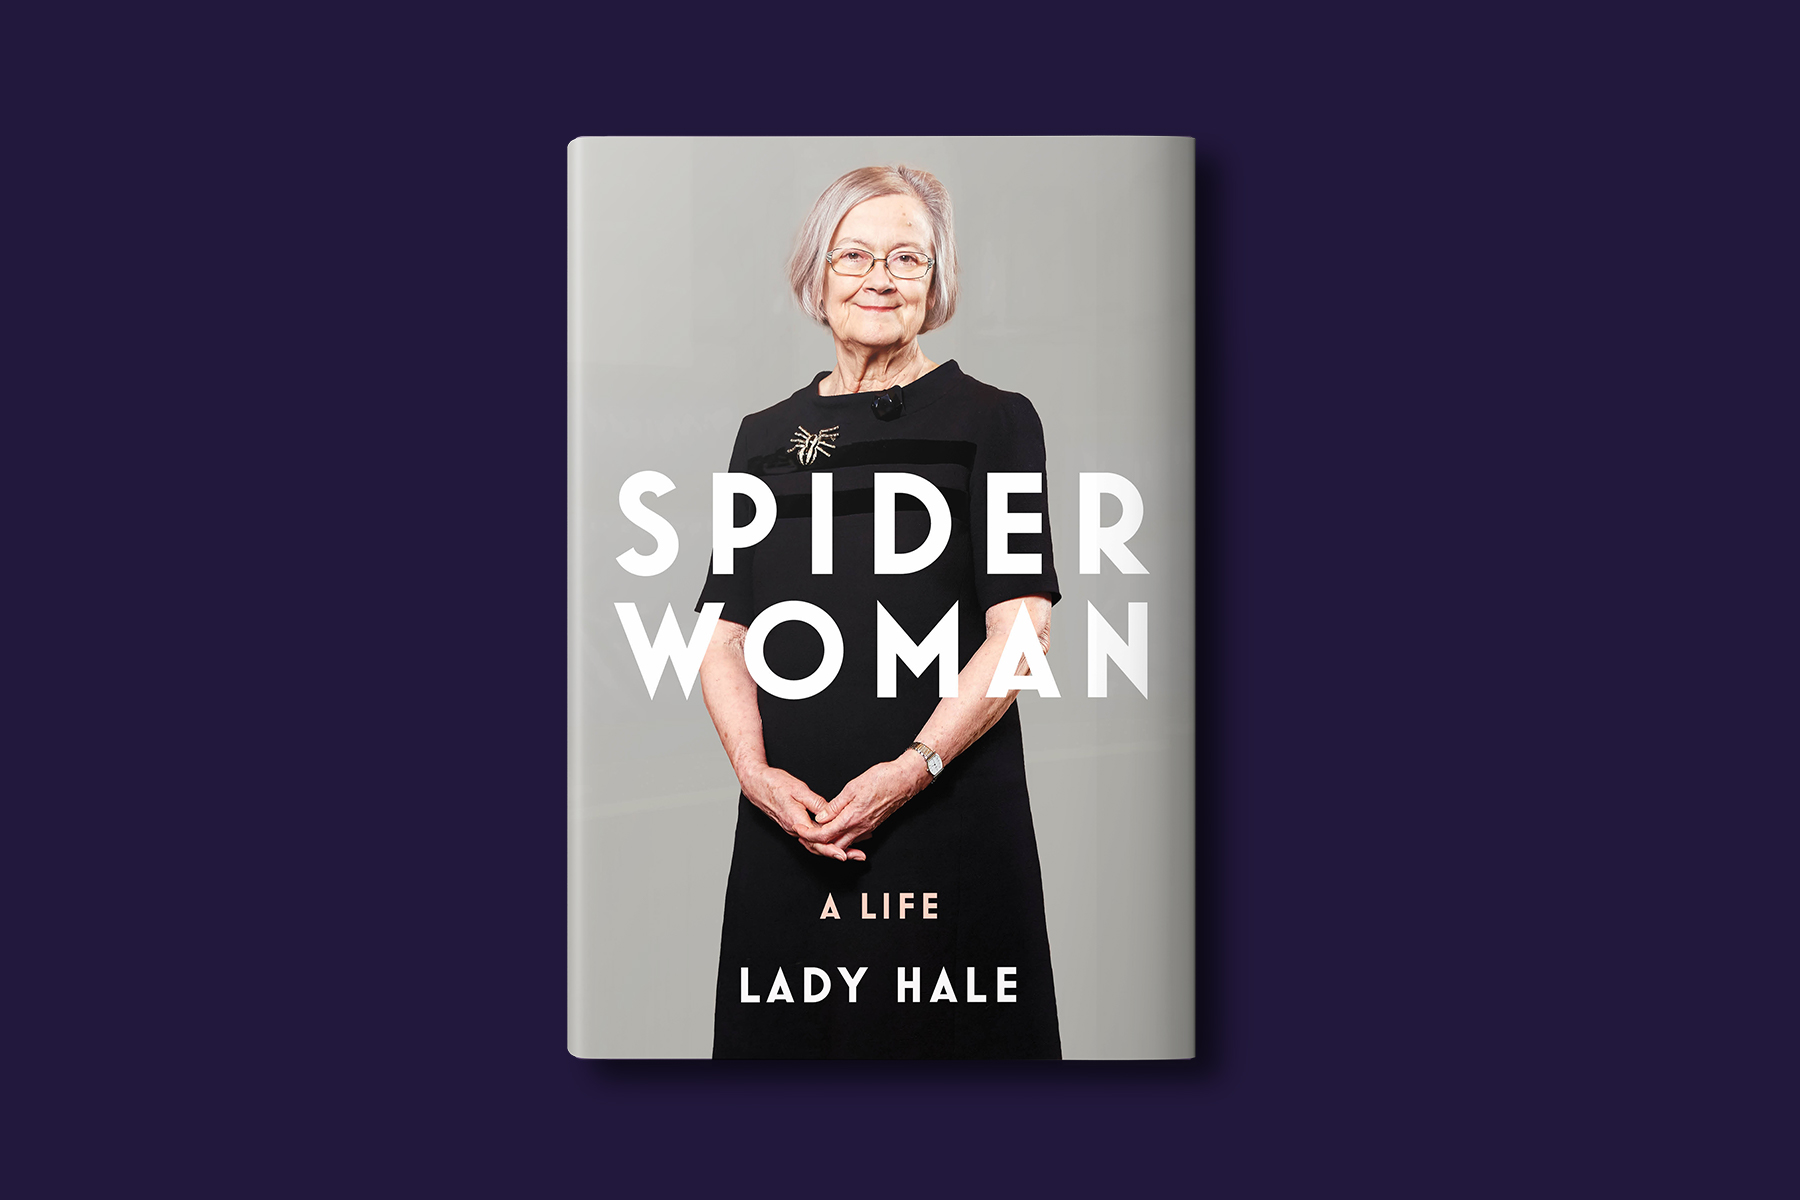 /content/dam/prh/articles/adults/2021/september/Spider_Woman_Lady_Hale.jpg